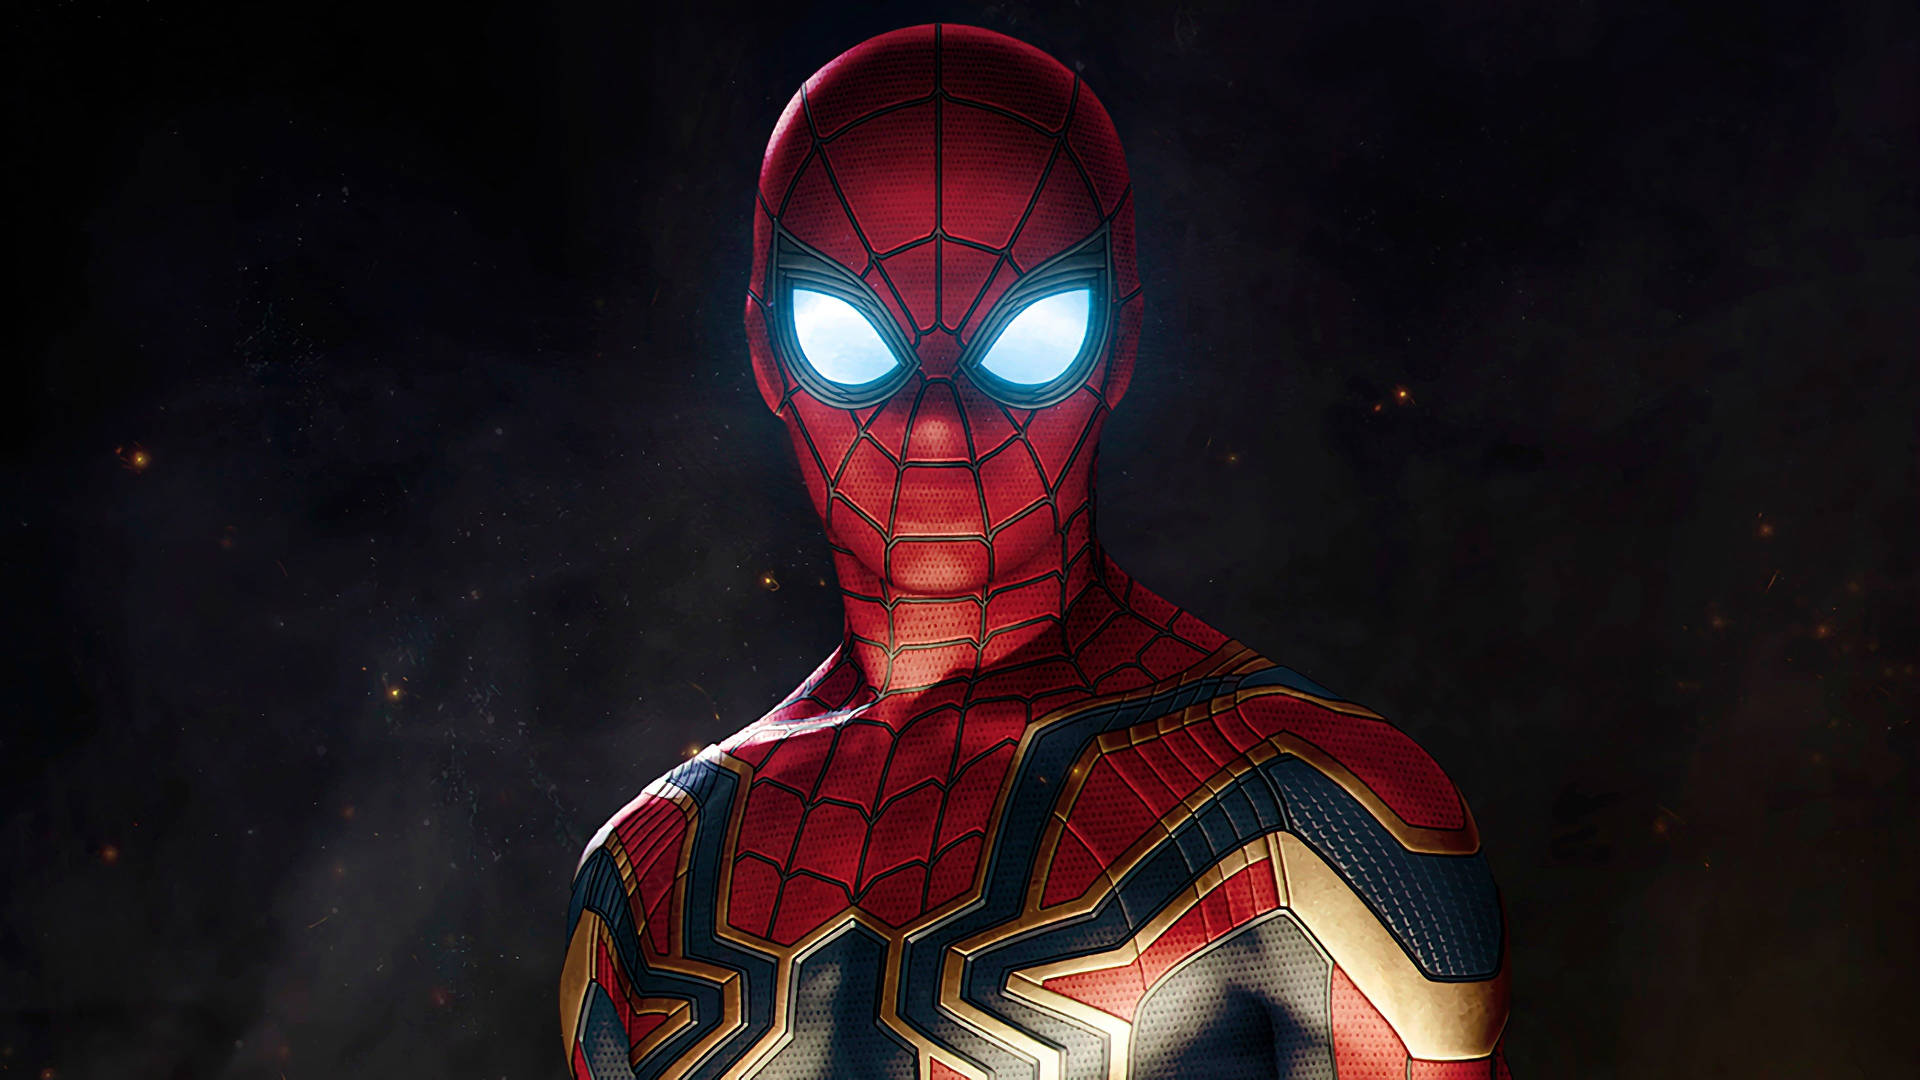 Glowing Eyes Spiderman Avenger 3d Background